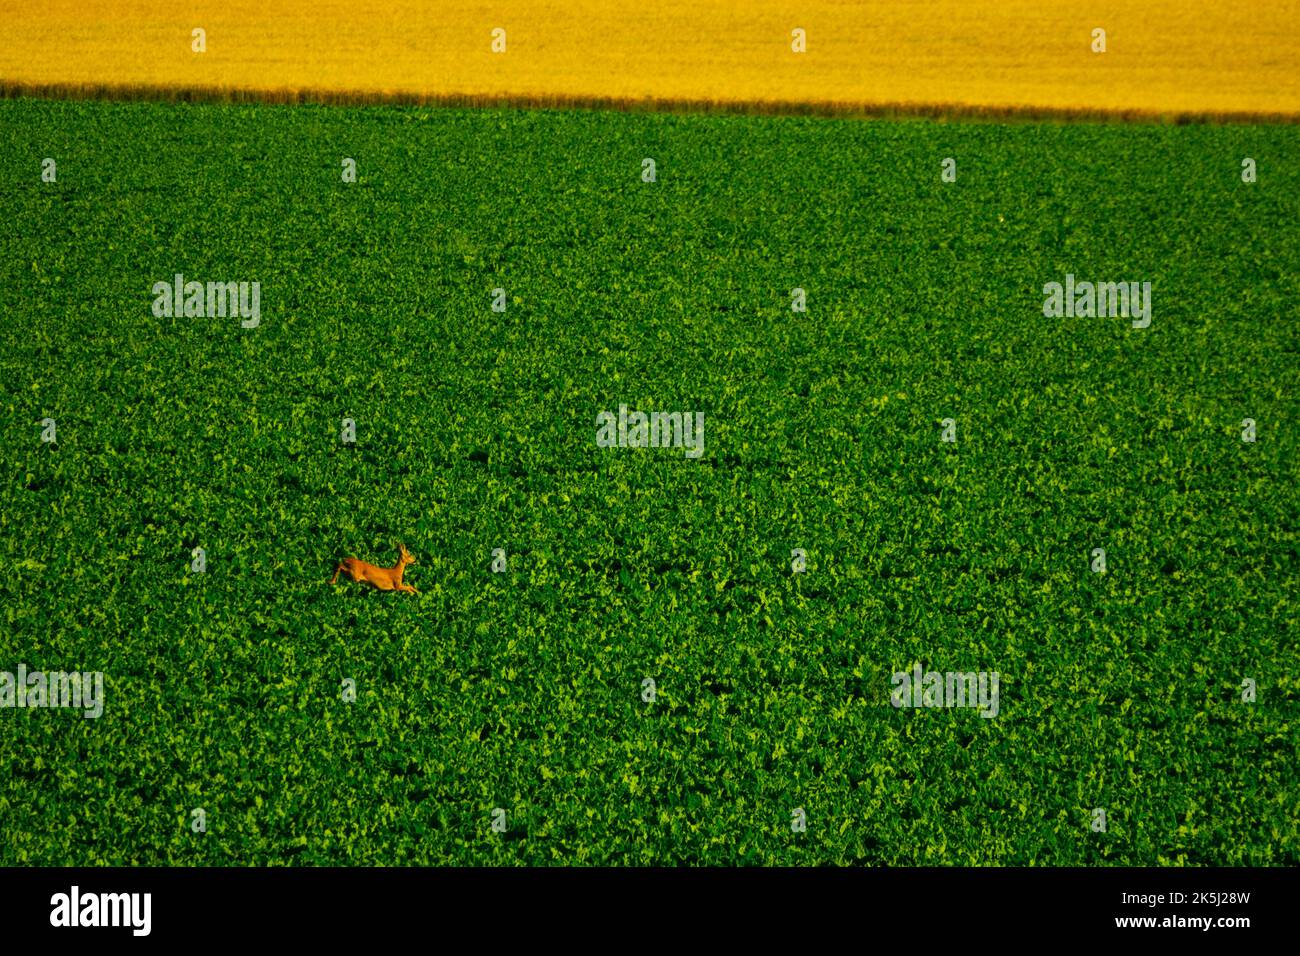 France, Essonne (91), Chalou-Moulineux, plain of Beauce, aerial view of a deer running in a field of sugar beets Stock Photo